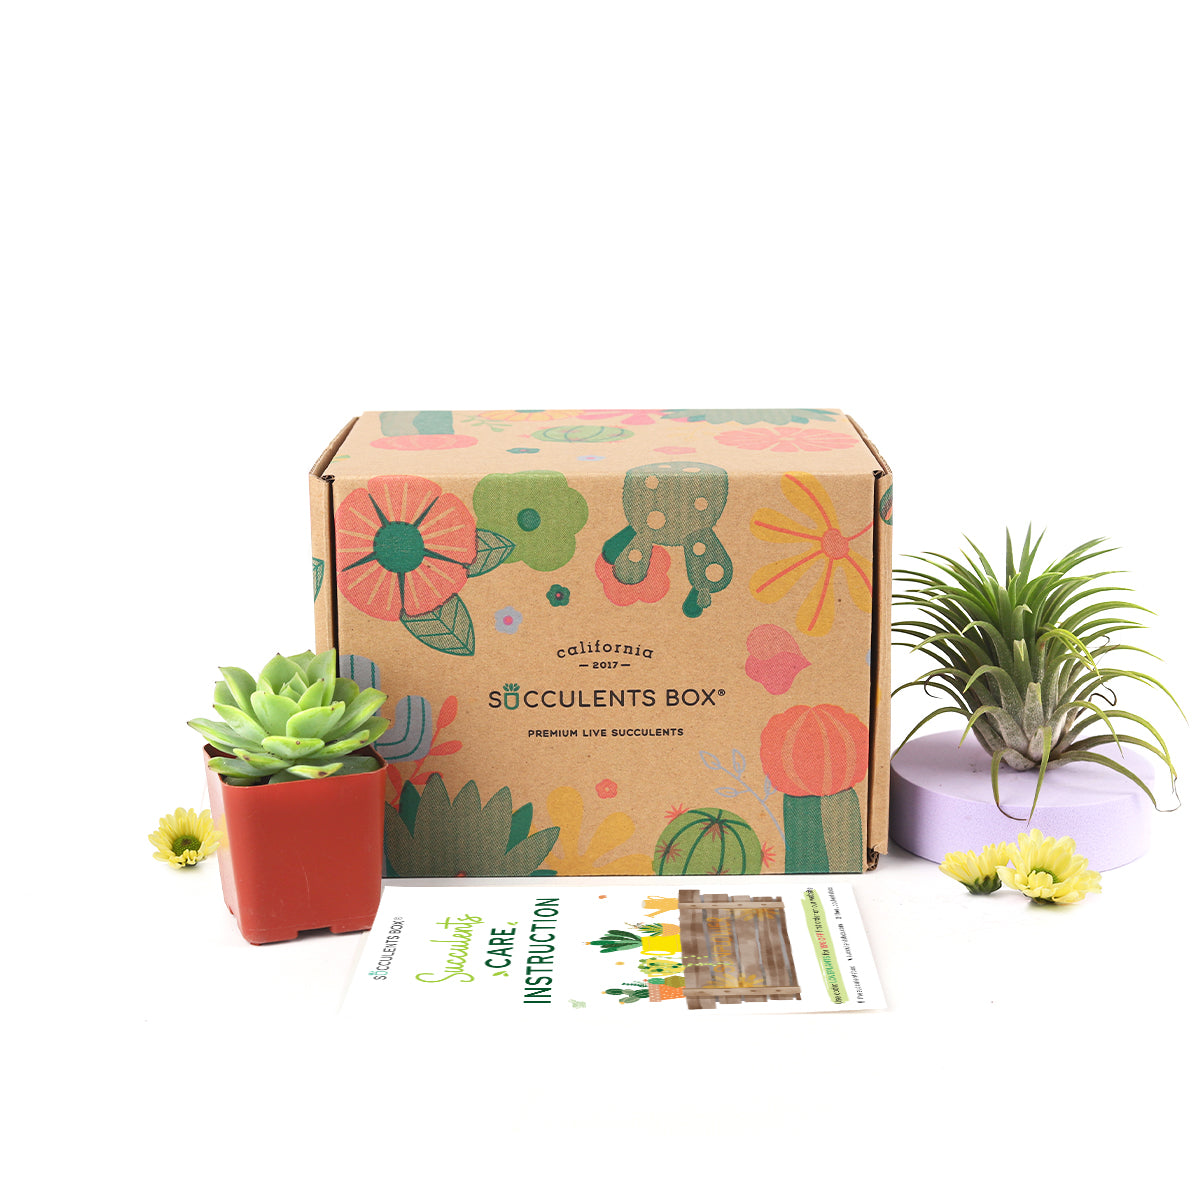 Succulent subscription box delivered monthly, Succulent subscription gift for sale, airplants subscription box monthly